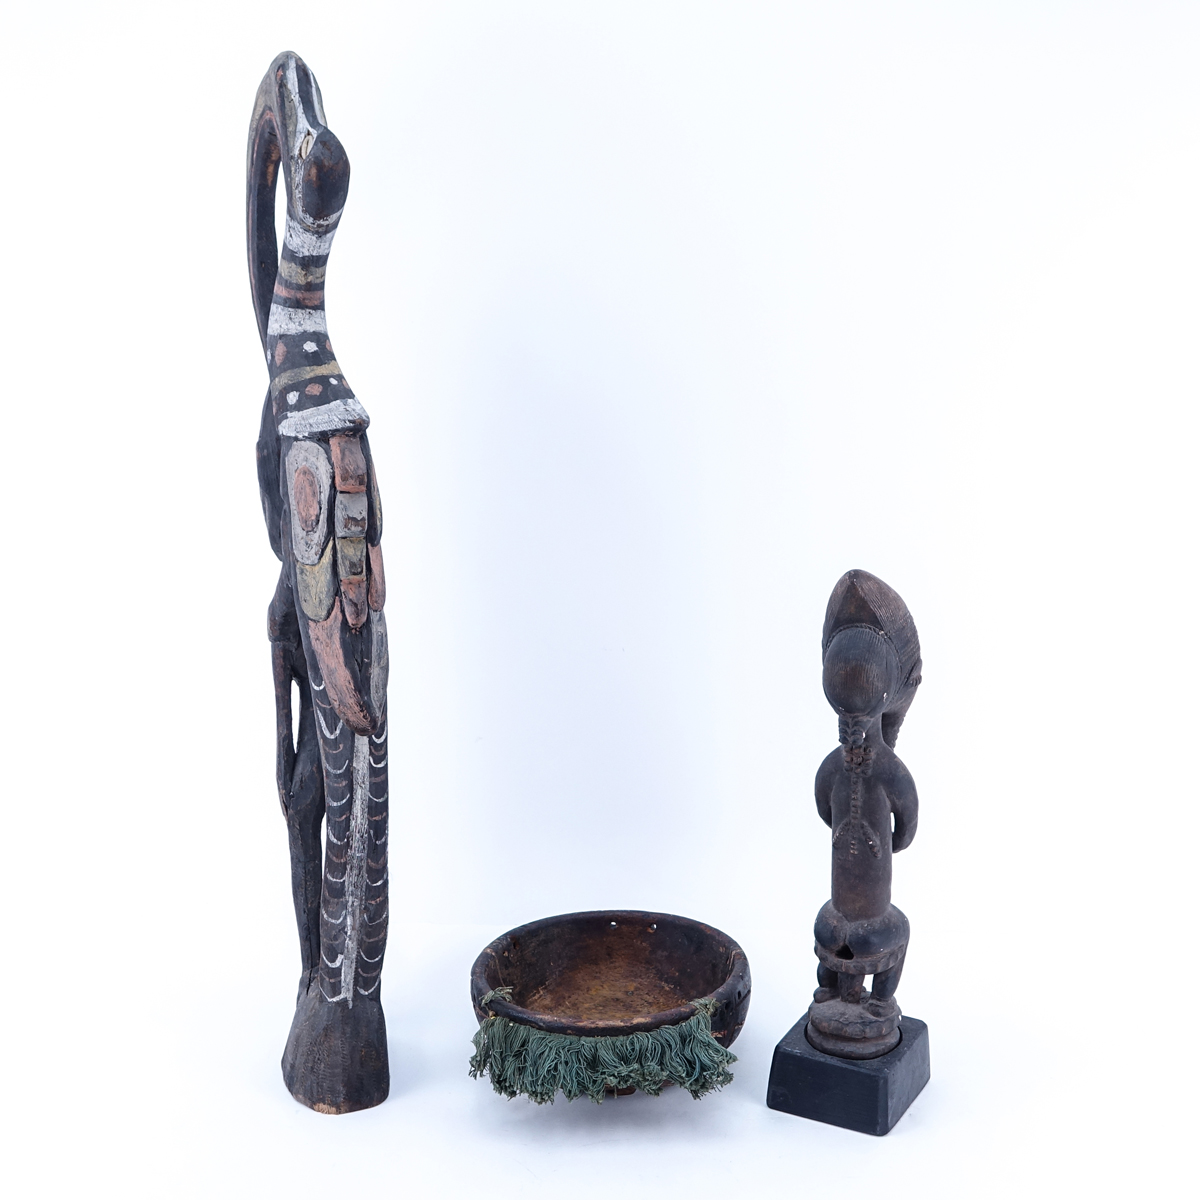 Antique Tribal Grouping of Three (3): African Polychrome Hornbill Bird with Figure, African Round Carved Wood Mask, and Possibly Dayak Carved Seated Male Figure. All figures are in antique condition, splits and chips.